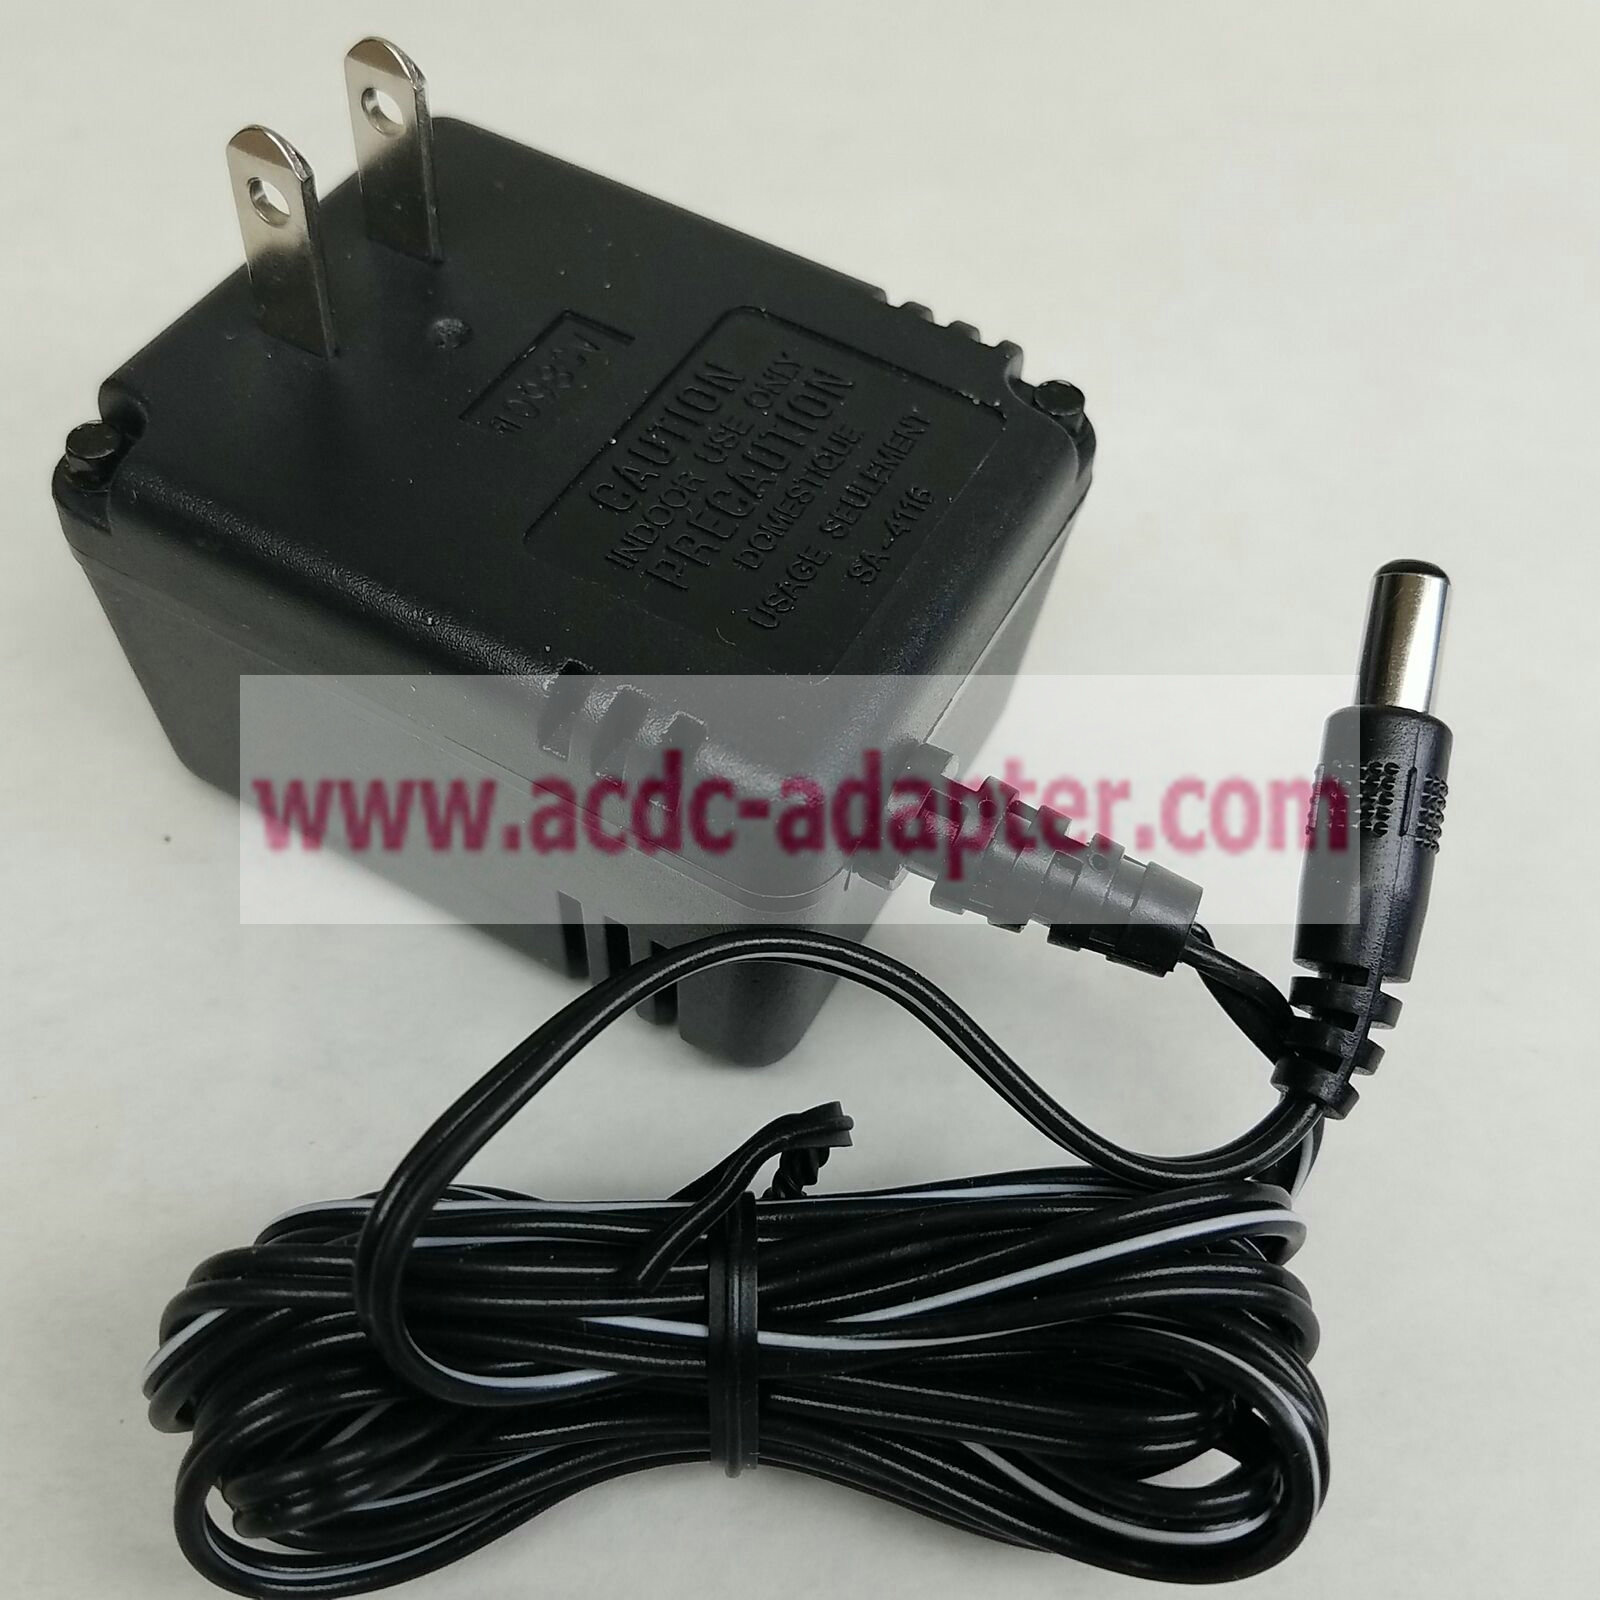 New RF System Lab AEC-T4160L A30650 6VDC 500mA ac adapter - Click Image to Close